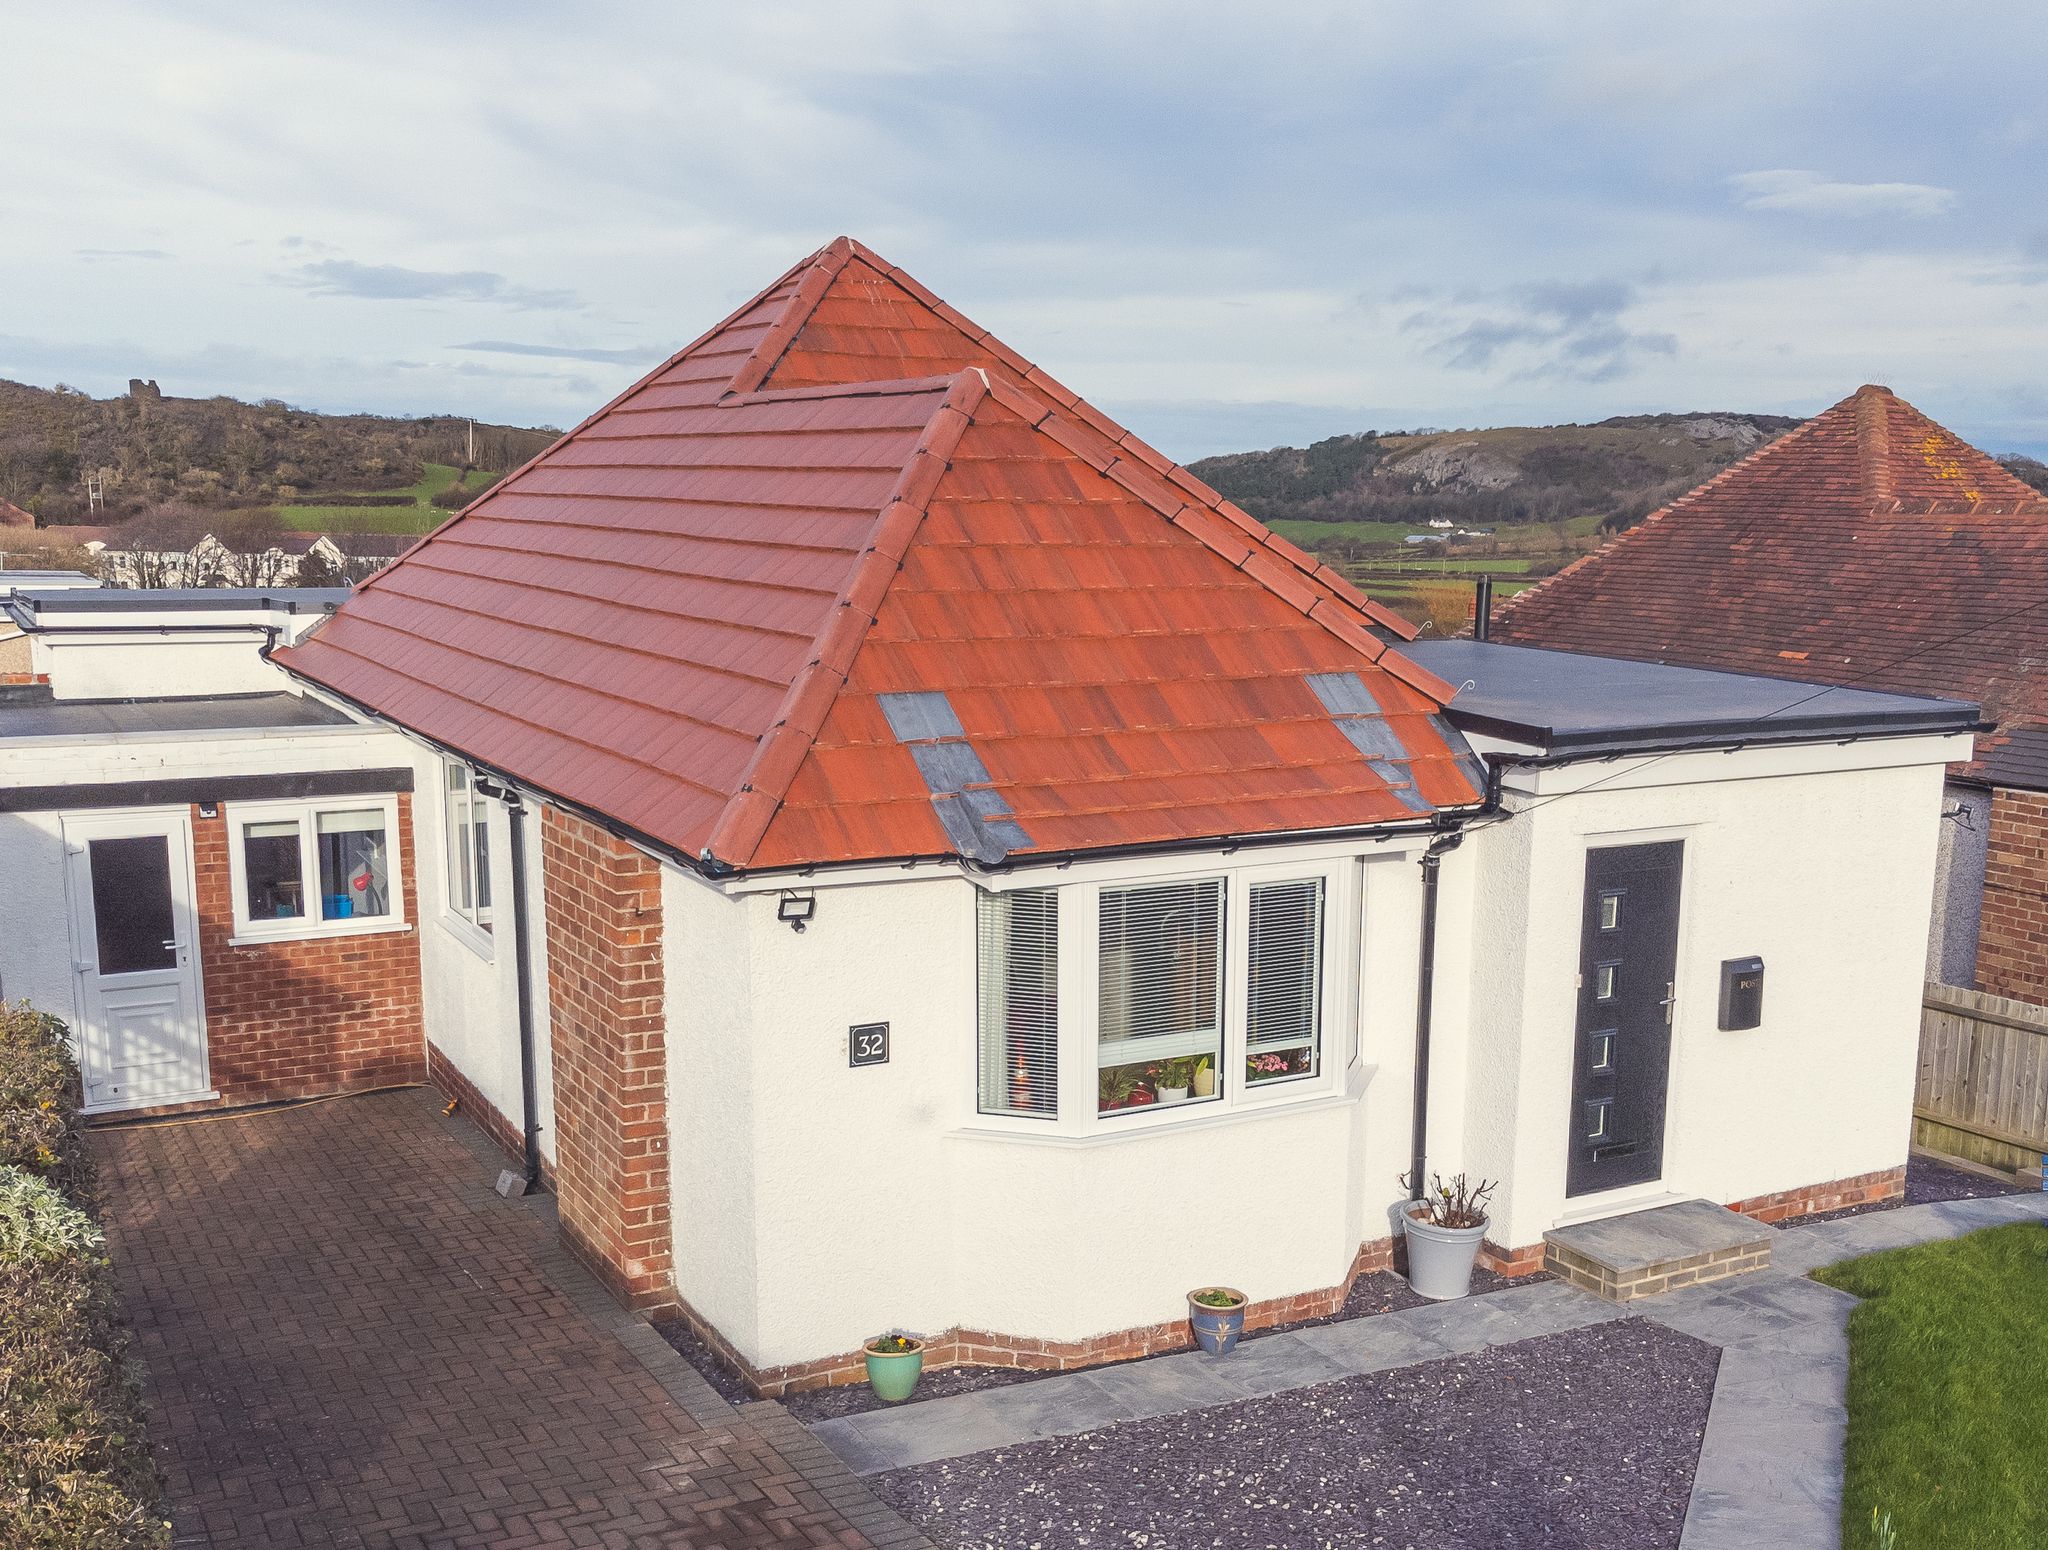 Tile Roof Contractors Glanwydden, LL31 - DD Roofing